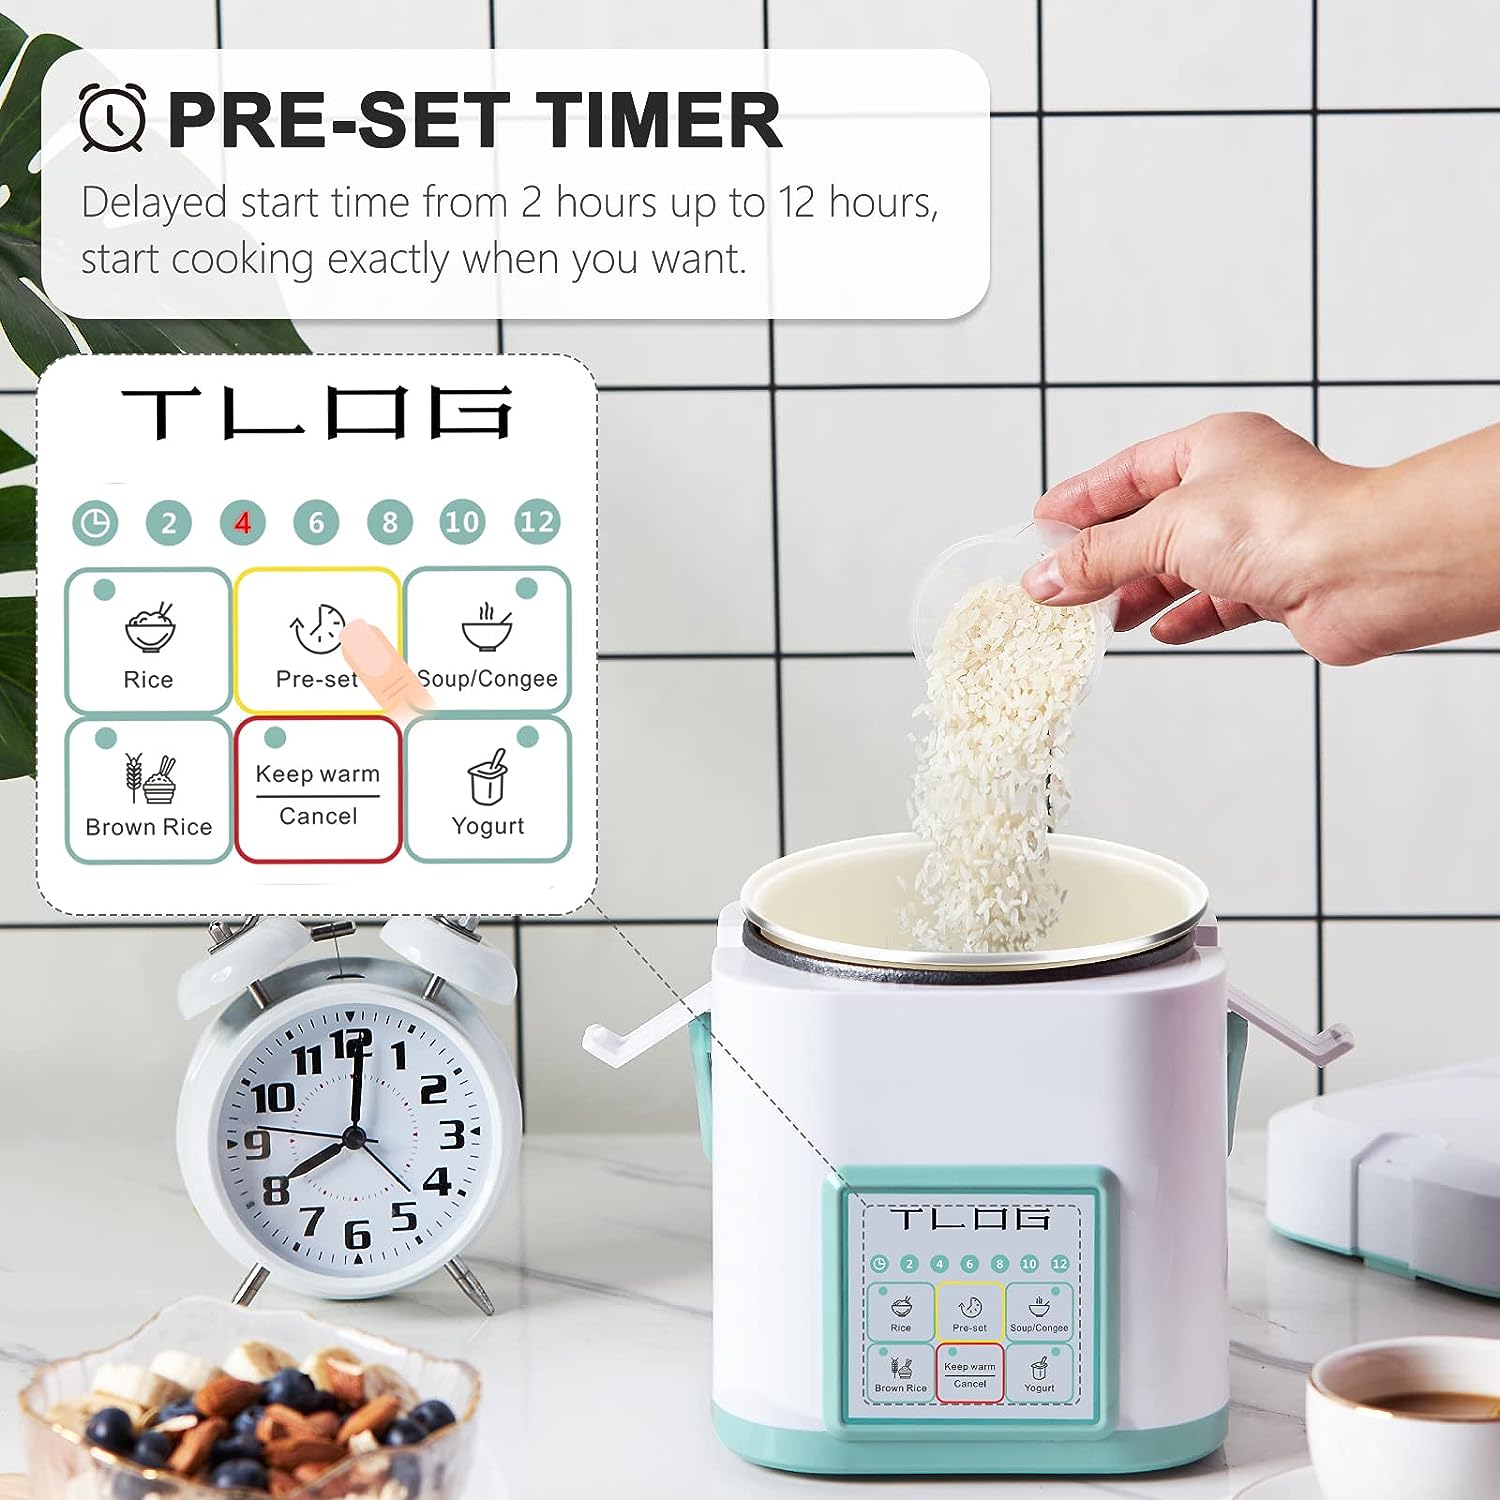 TLOG Mini Rice Cooker 2.5 Cups Uncooked, Healthy Ceramic Coating Portable Rice  Cooker, 1.2L Travel Rice Cooker Small for 1-3 People, Personal Rice maker,  Food Steamer, 12 Hours delay timer, Multi-cooker for